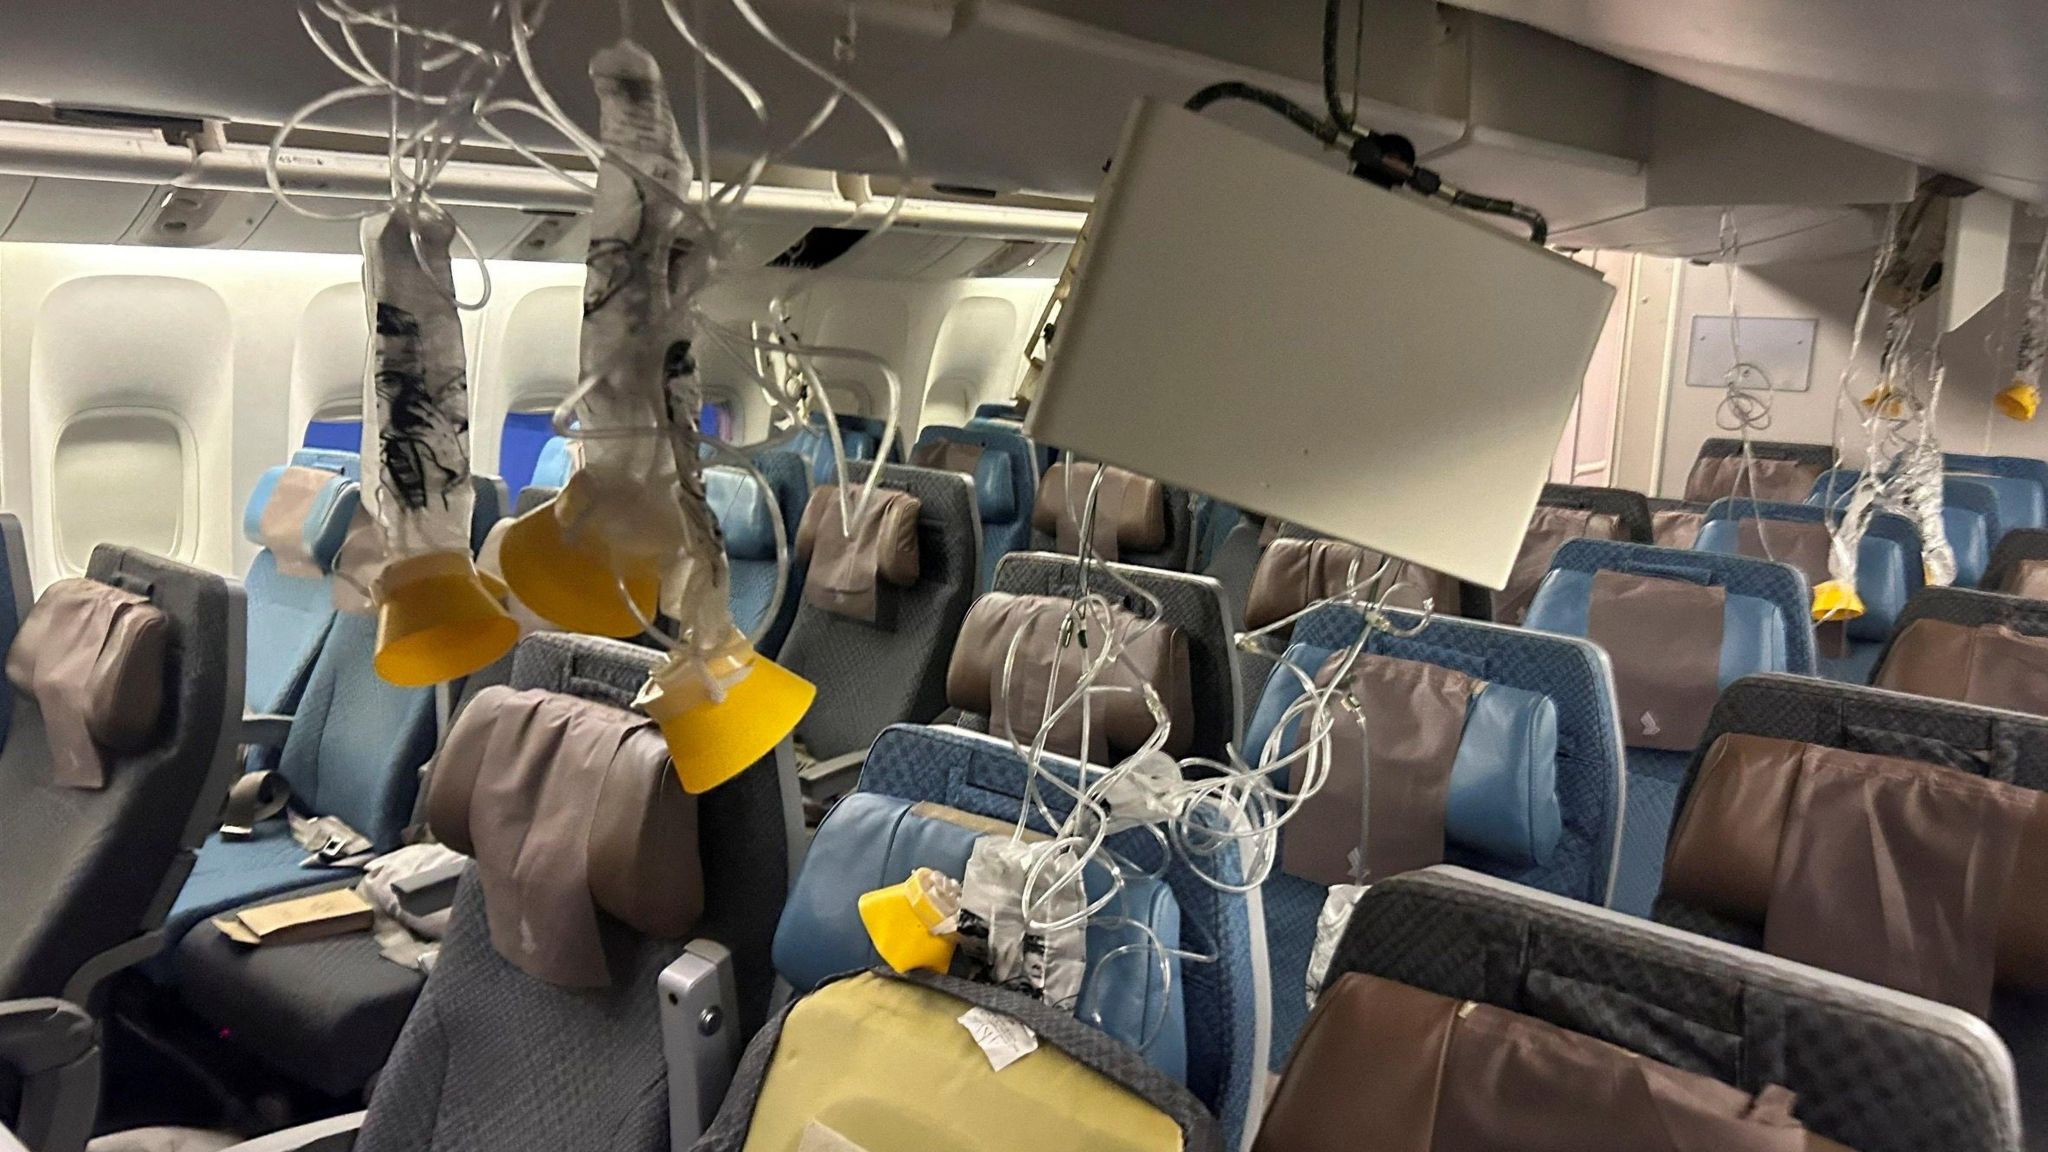 The interior of Singapore Airline flight SG321 is pictured after an em